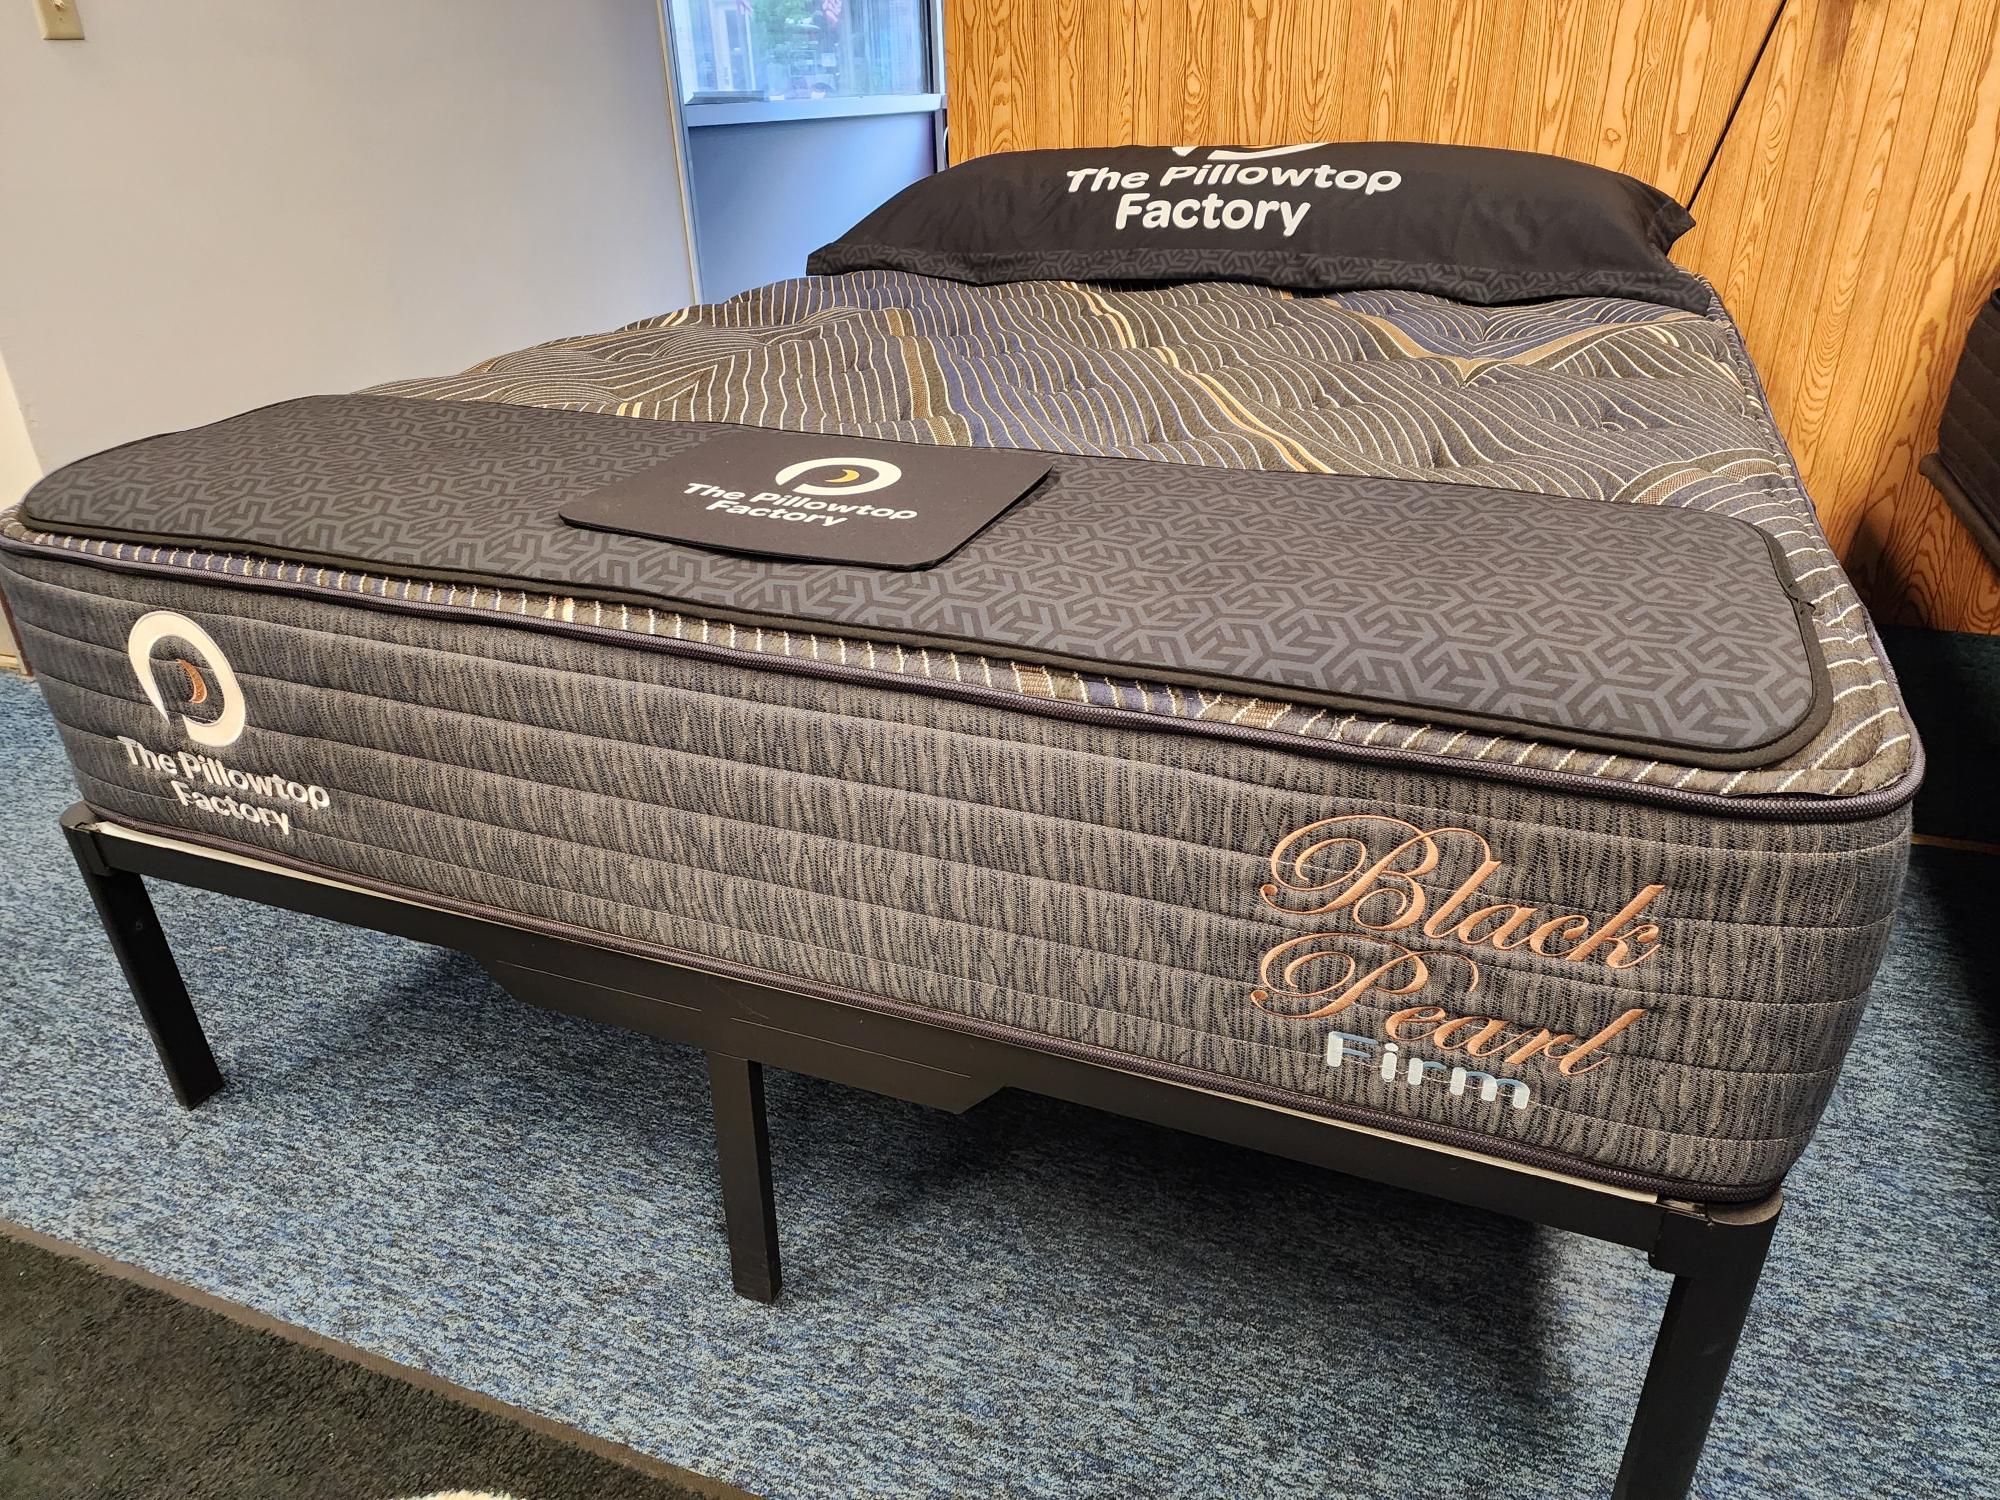 Black Pearl Firm Mattress for sale